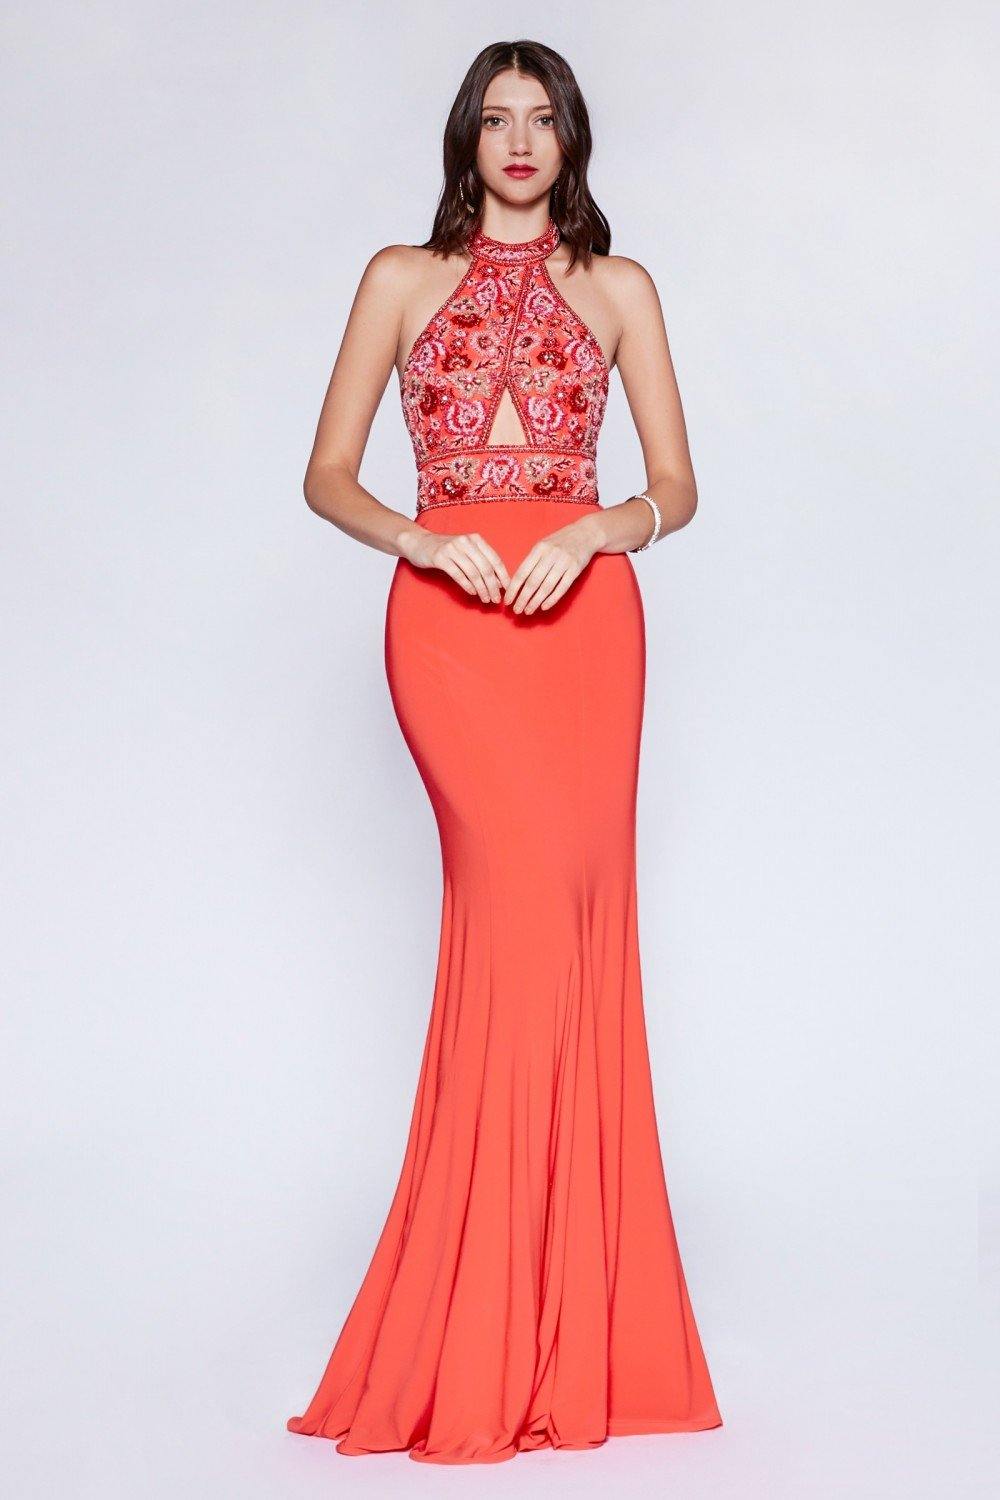 Sexy Long Fitted Evening Gown Formal Dress - The Dress Outlet Cinderella Divine